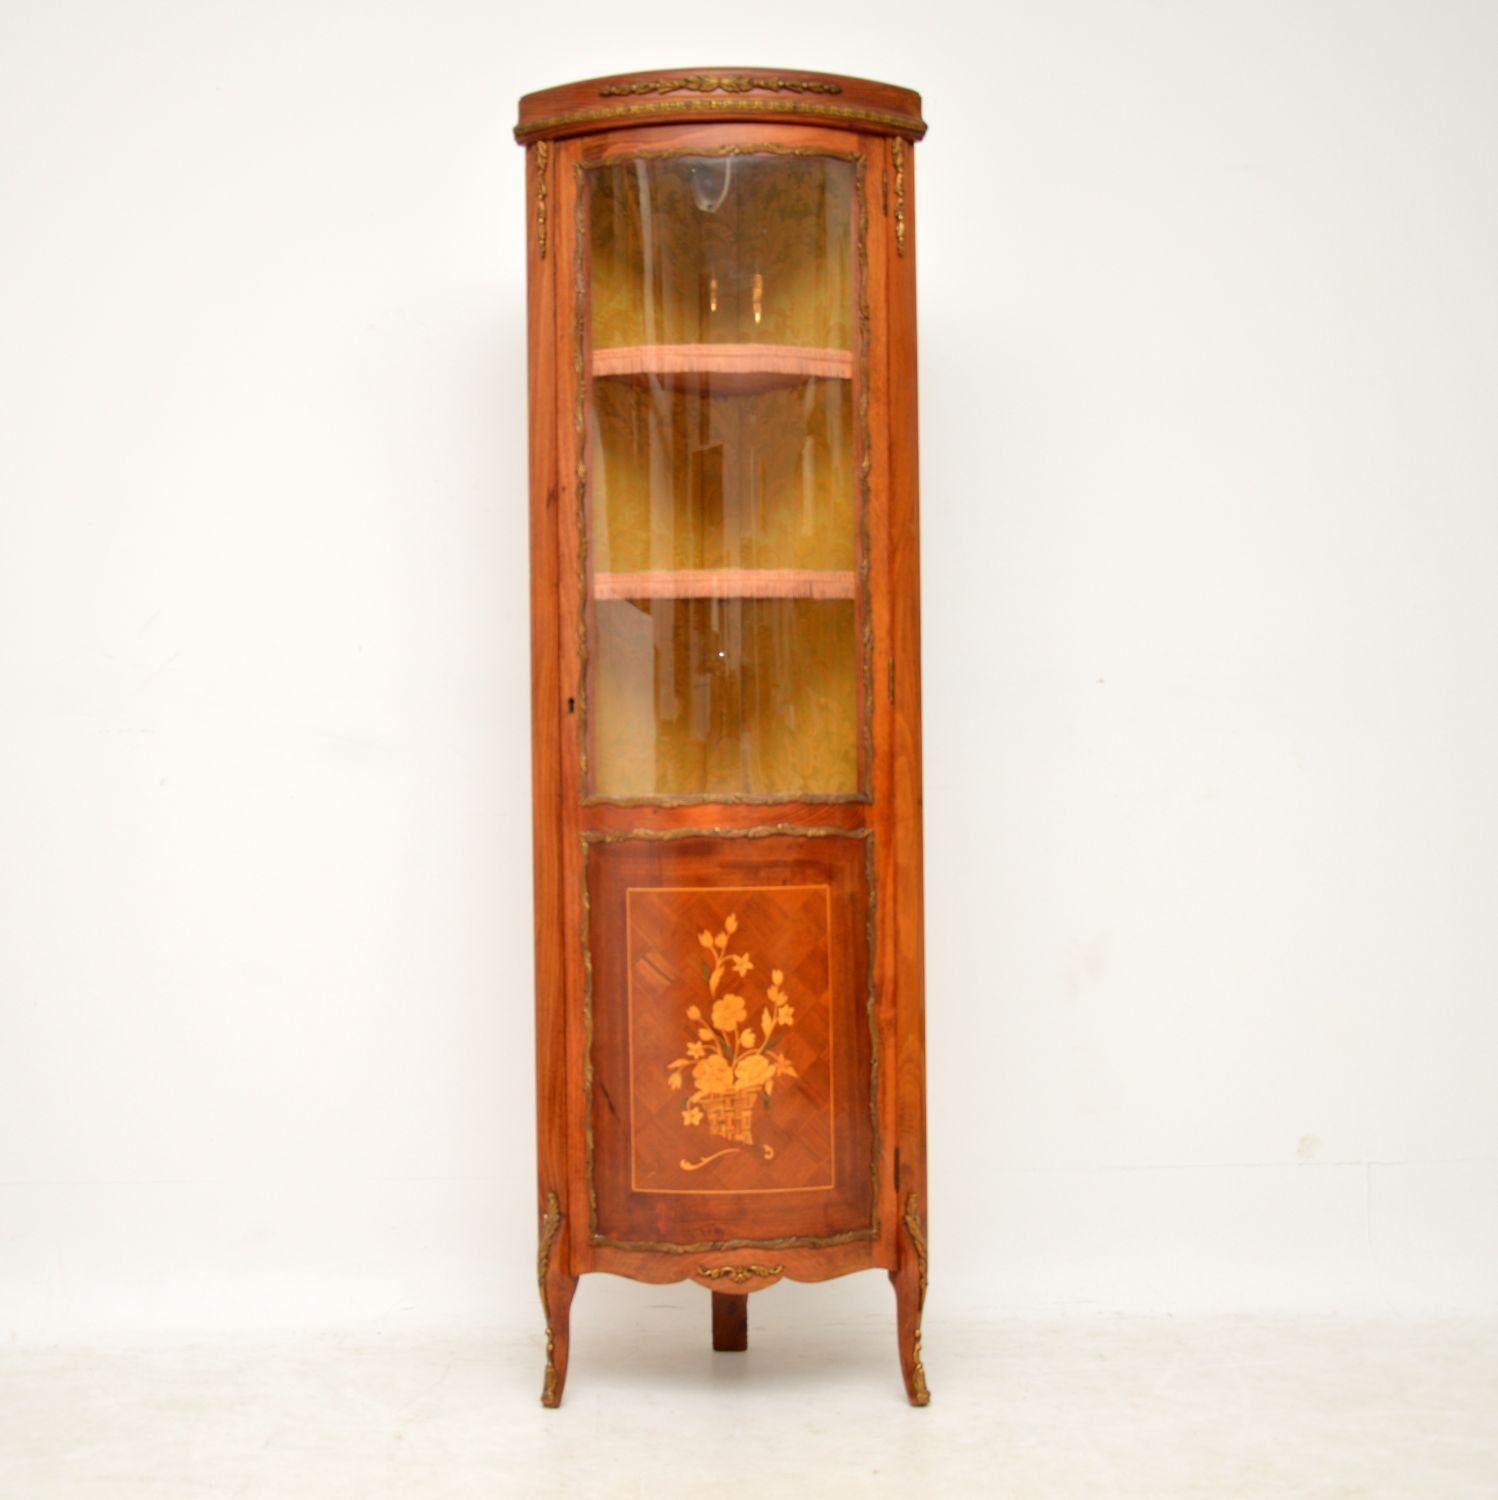 Antique French style Kingwood and walnut corner cabinet in excellent condition and dating to circa 1950s period. It has gilt metal mounts all-over & the inside still has the original fabric which is in good order. The bottom panel is Kingwood